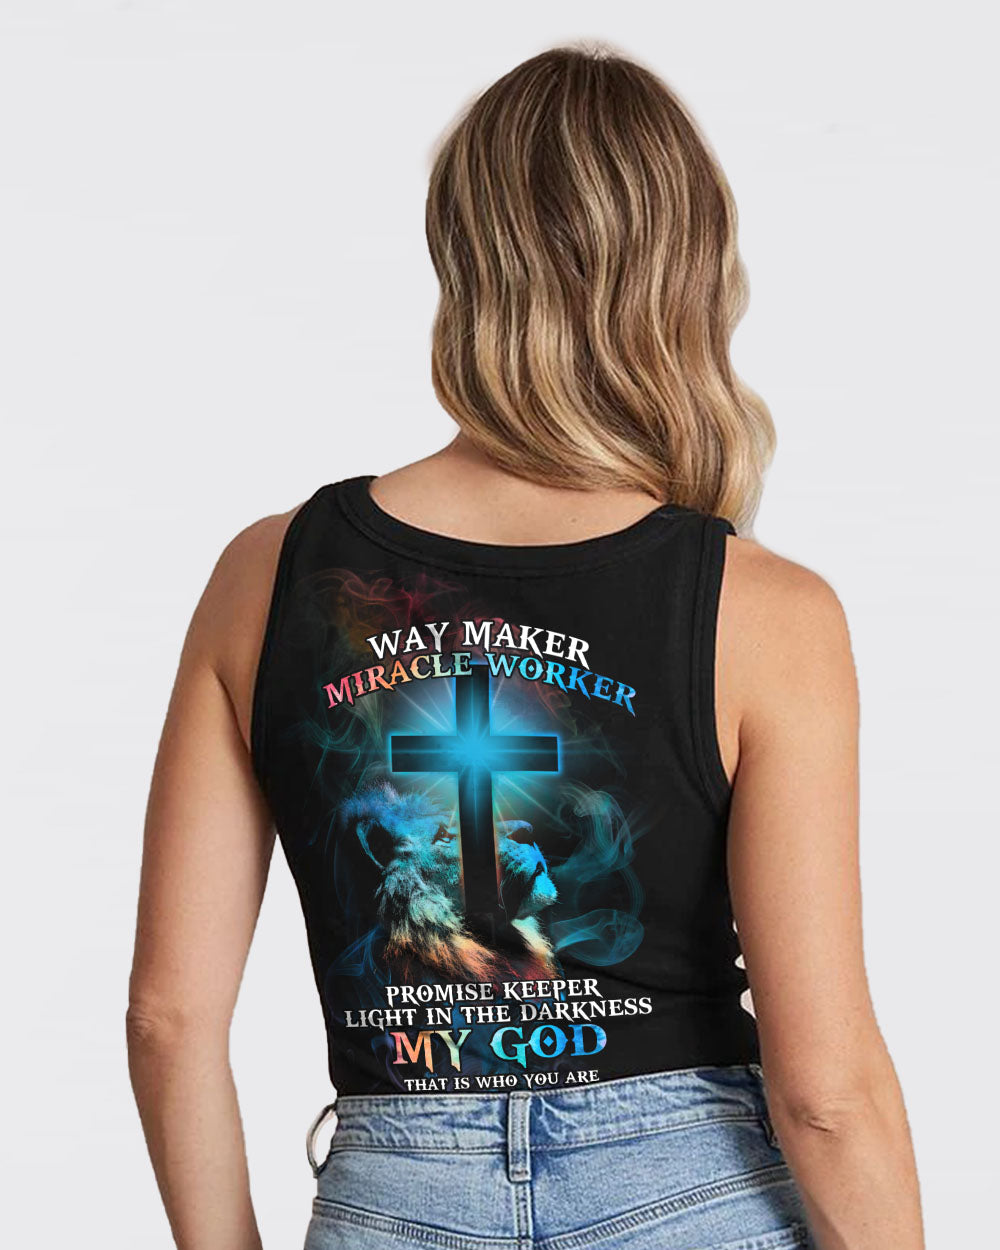 Way Maker Miracle Worker Lion Cross Light Colorful Women's Christian Tanks